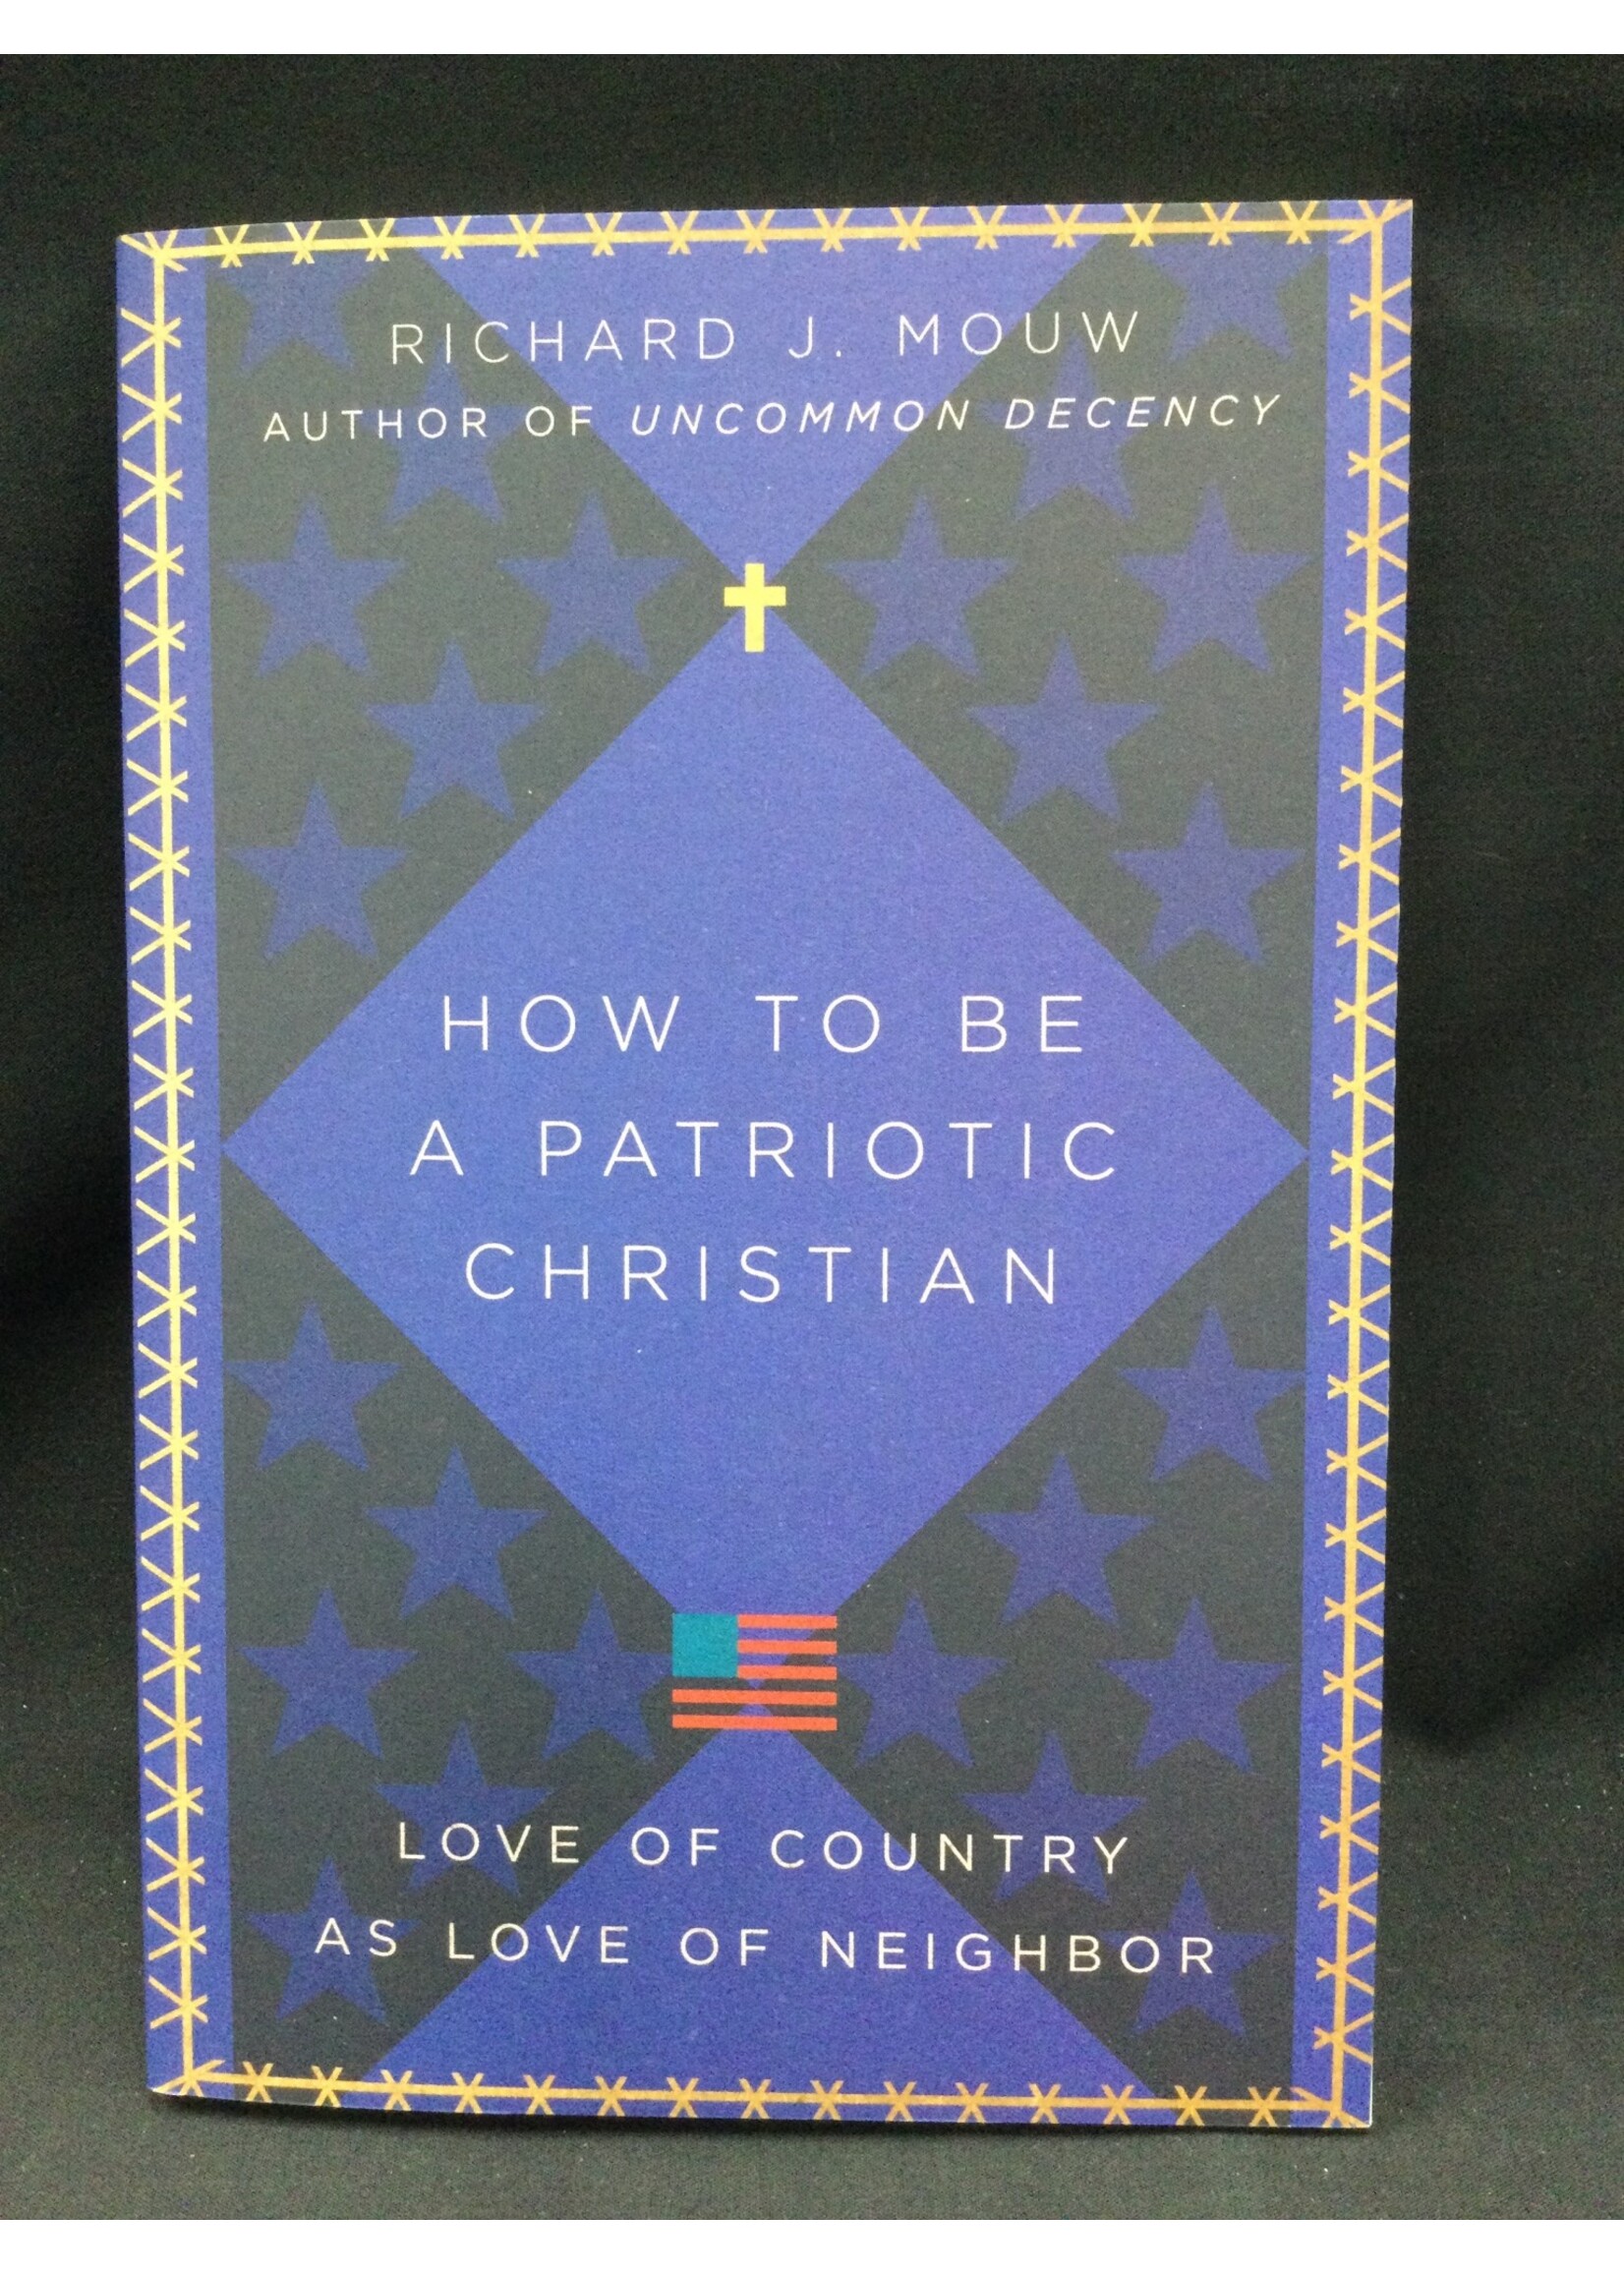 HOW TO BE A PATRIOTIC CHRISTIAN